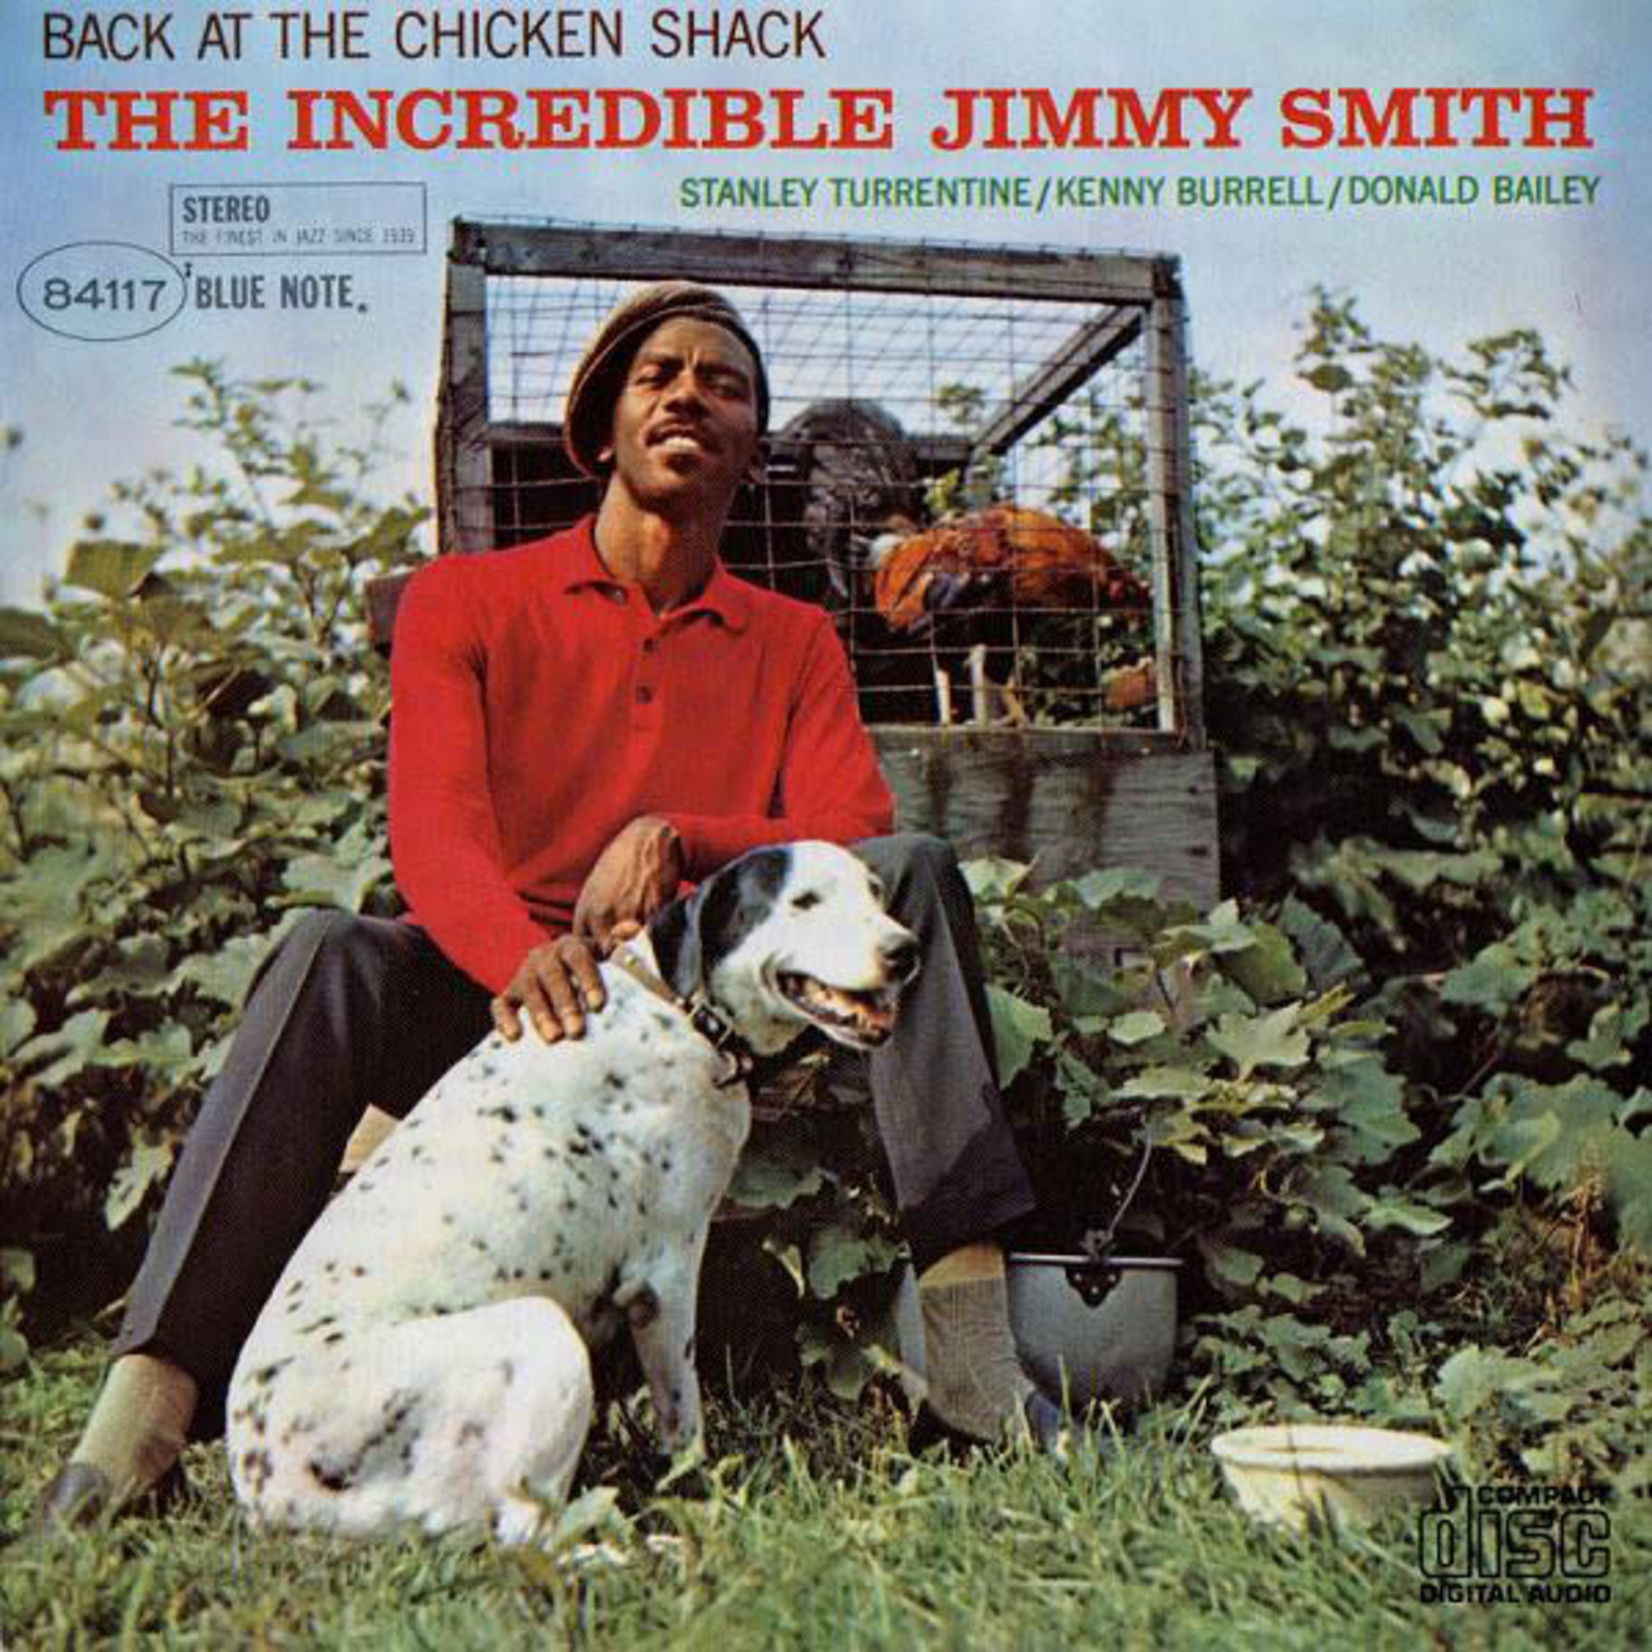 [New] Jimmy Smith - Back At the Chicken Shack (Blue Note Classic Vinyl Edition)